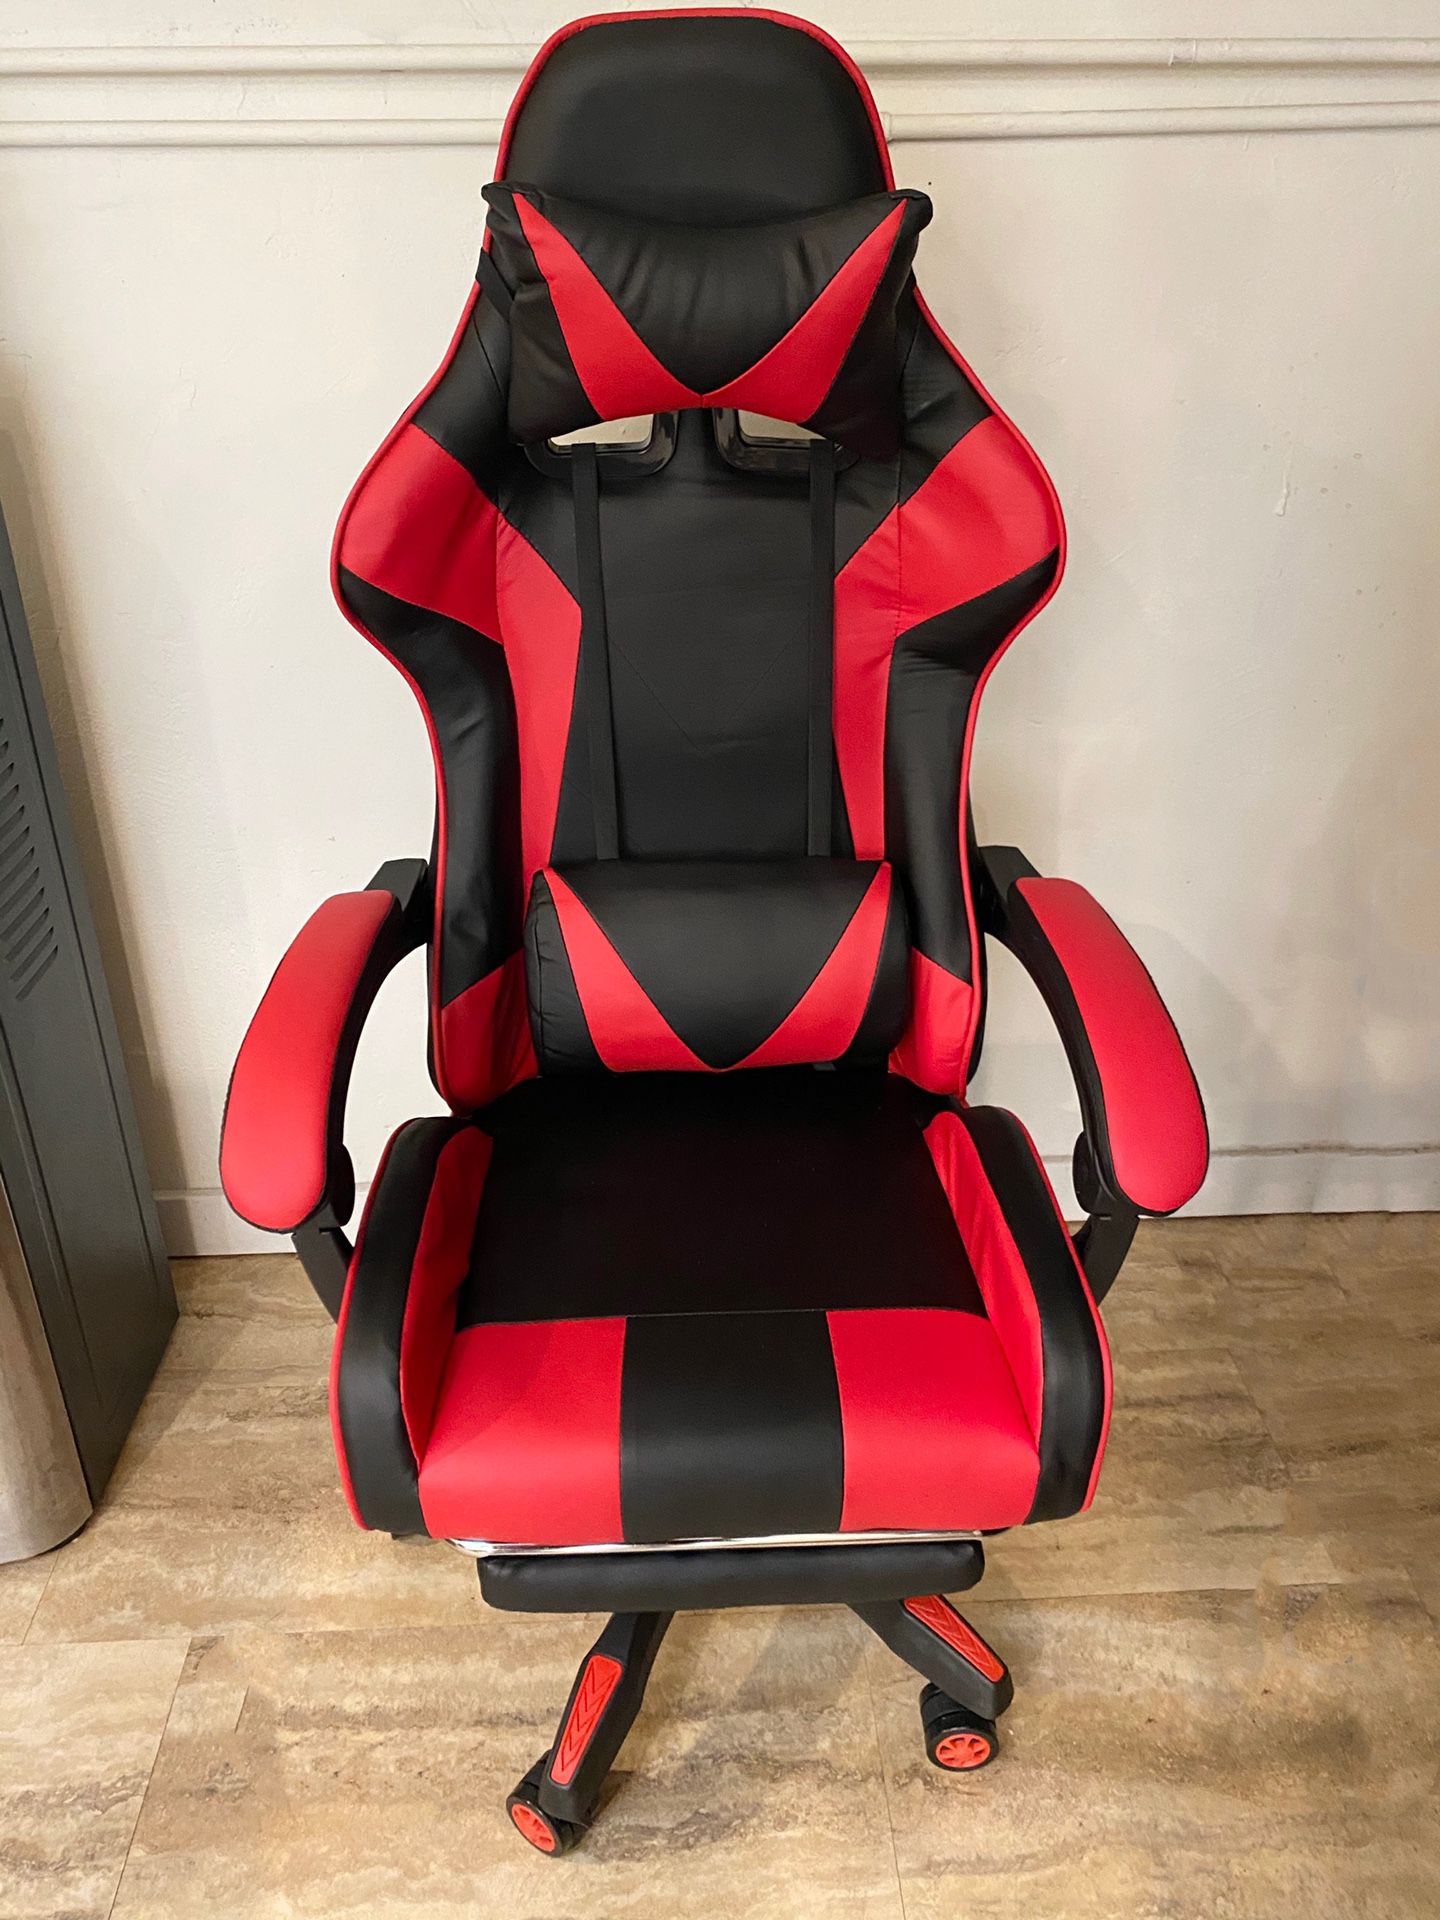 Red Gaming or Computer Chair - Brand New and Assembled